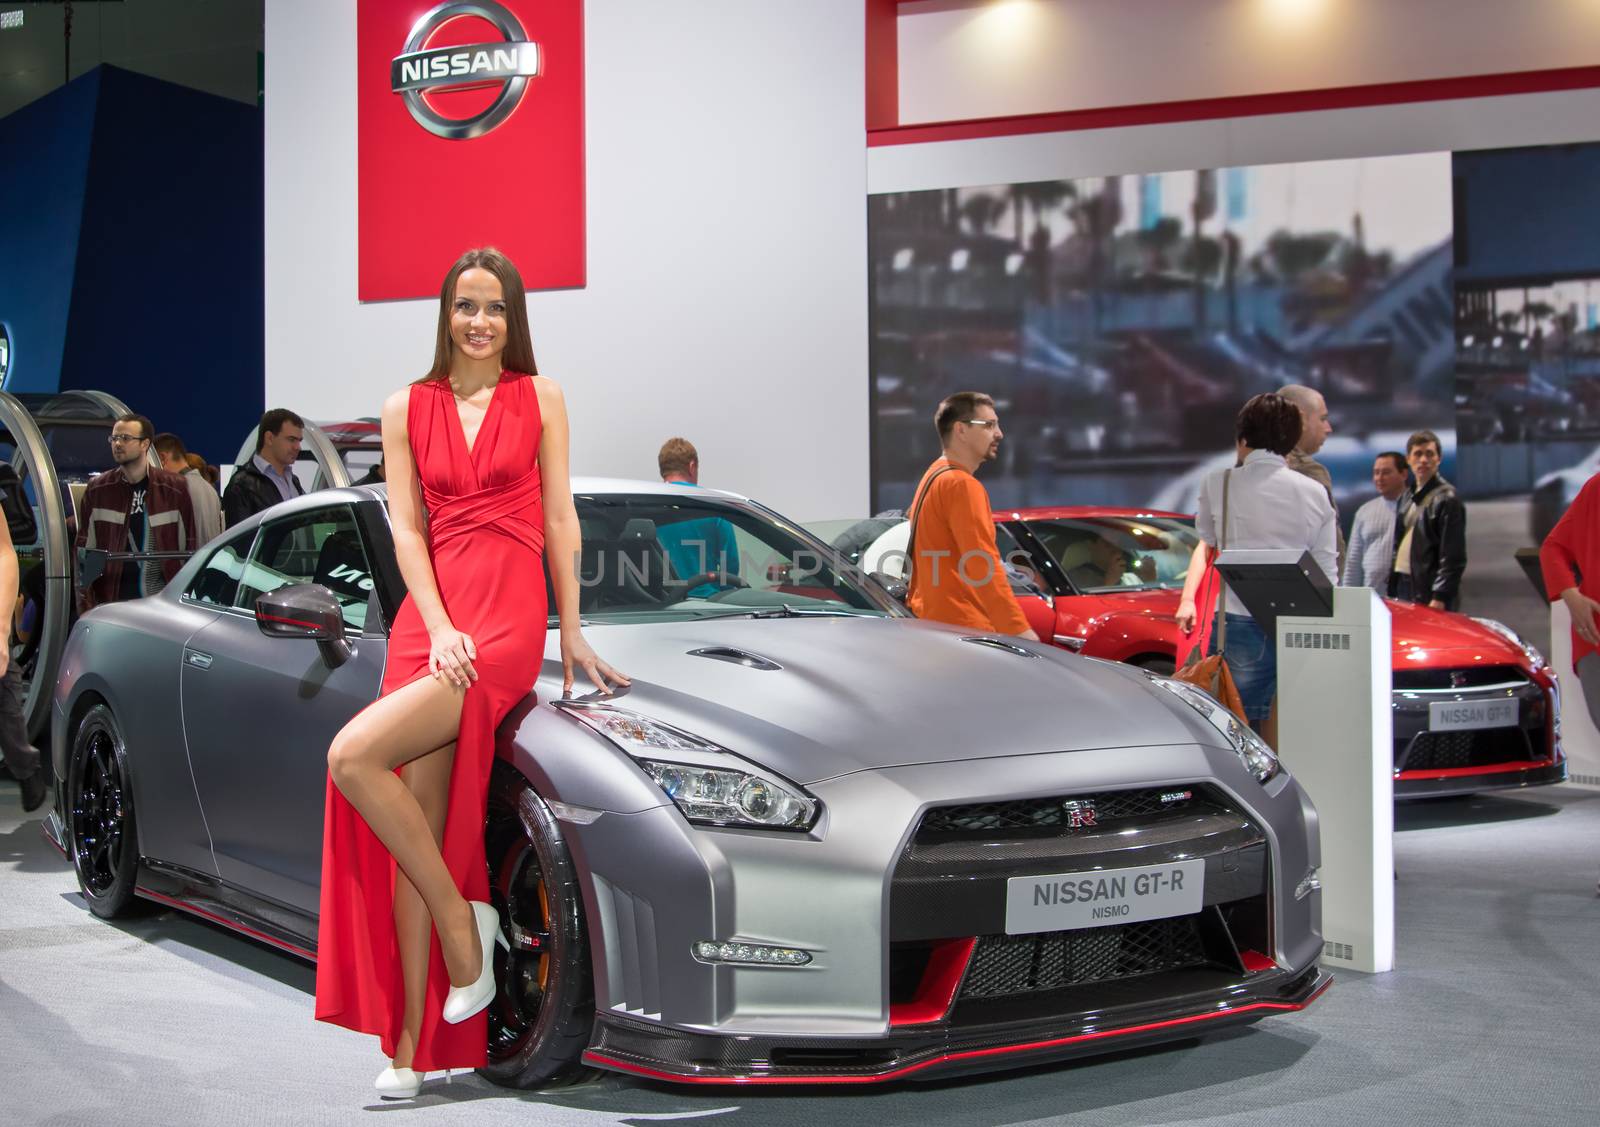 MOSCOW-SEPTEMBER 2: Nissan GT-R Nismo at the Moscow International Automobile Salon on September 2, 2014 in Moscow, Russia.